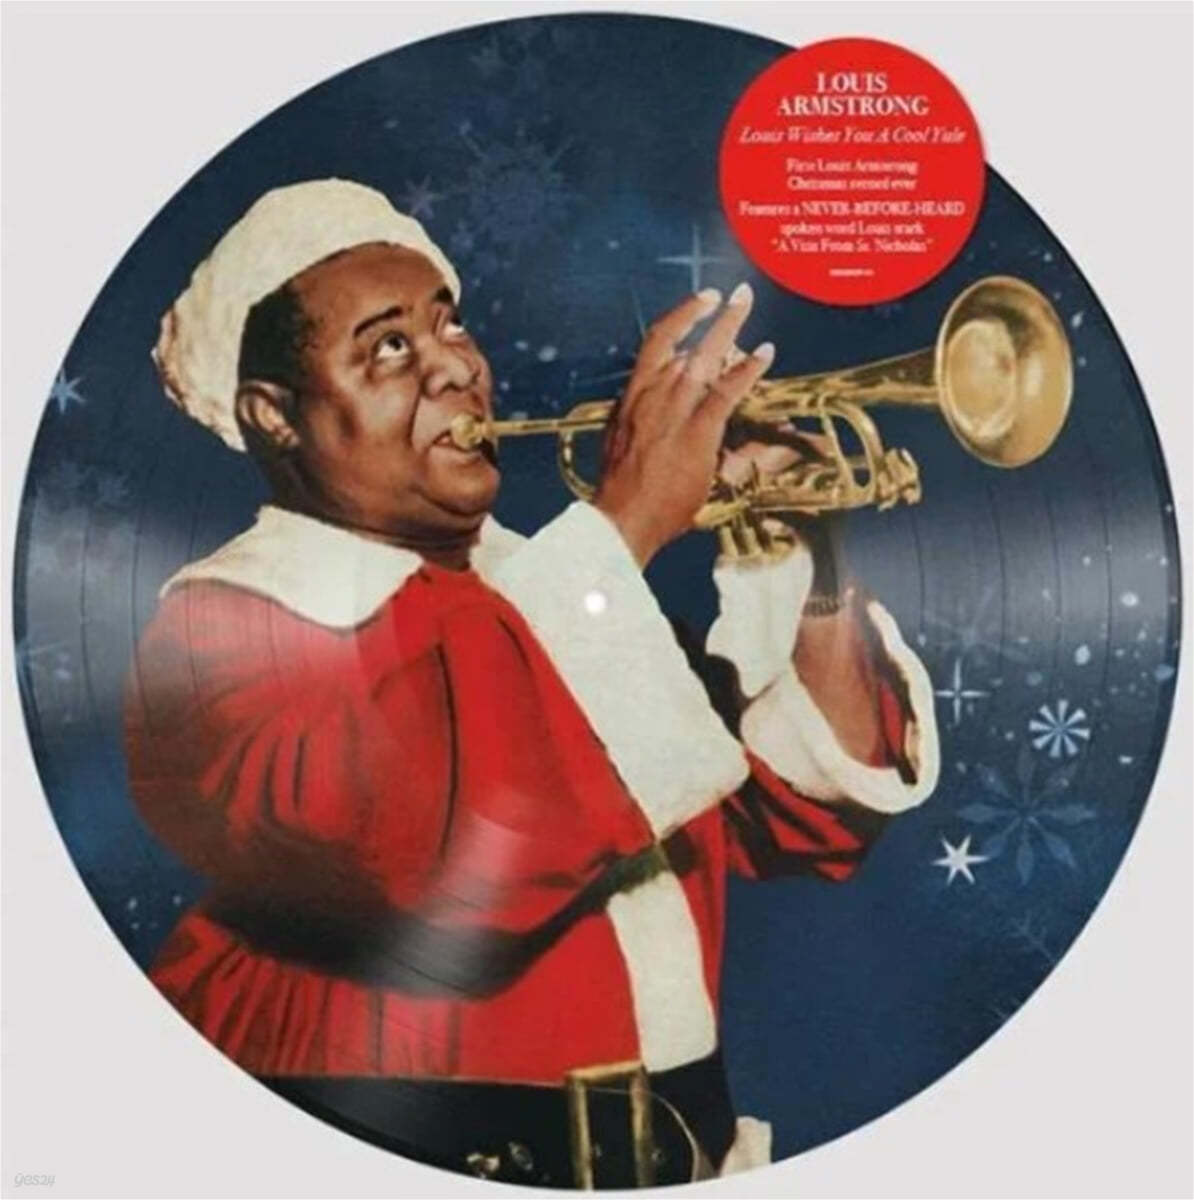 Louis Armstrong (루이 암스트롱) - Louis Wishes You a Cool Yule [픽처디스크 LP]